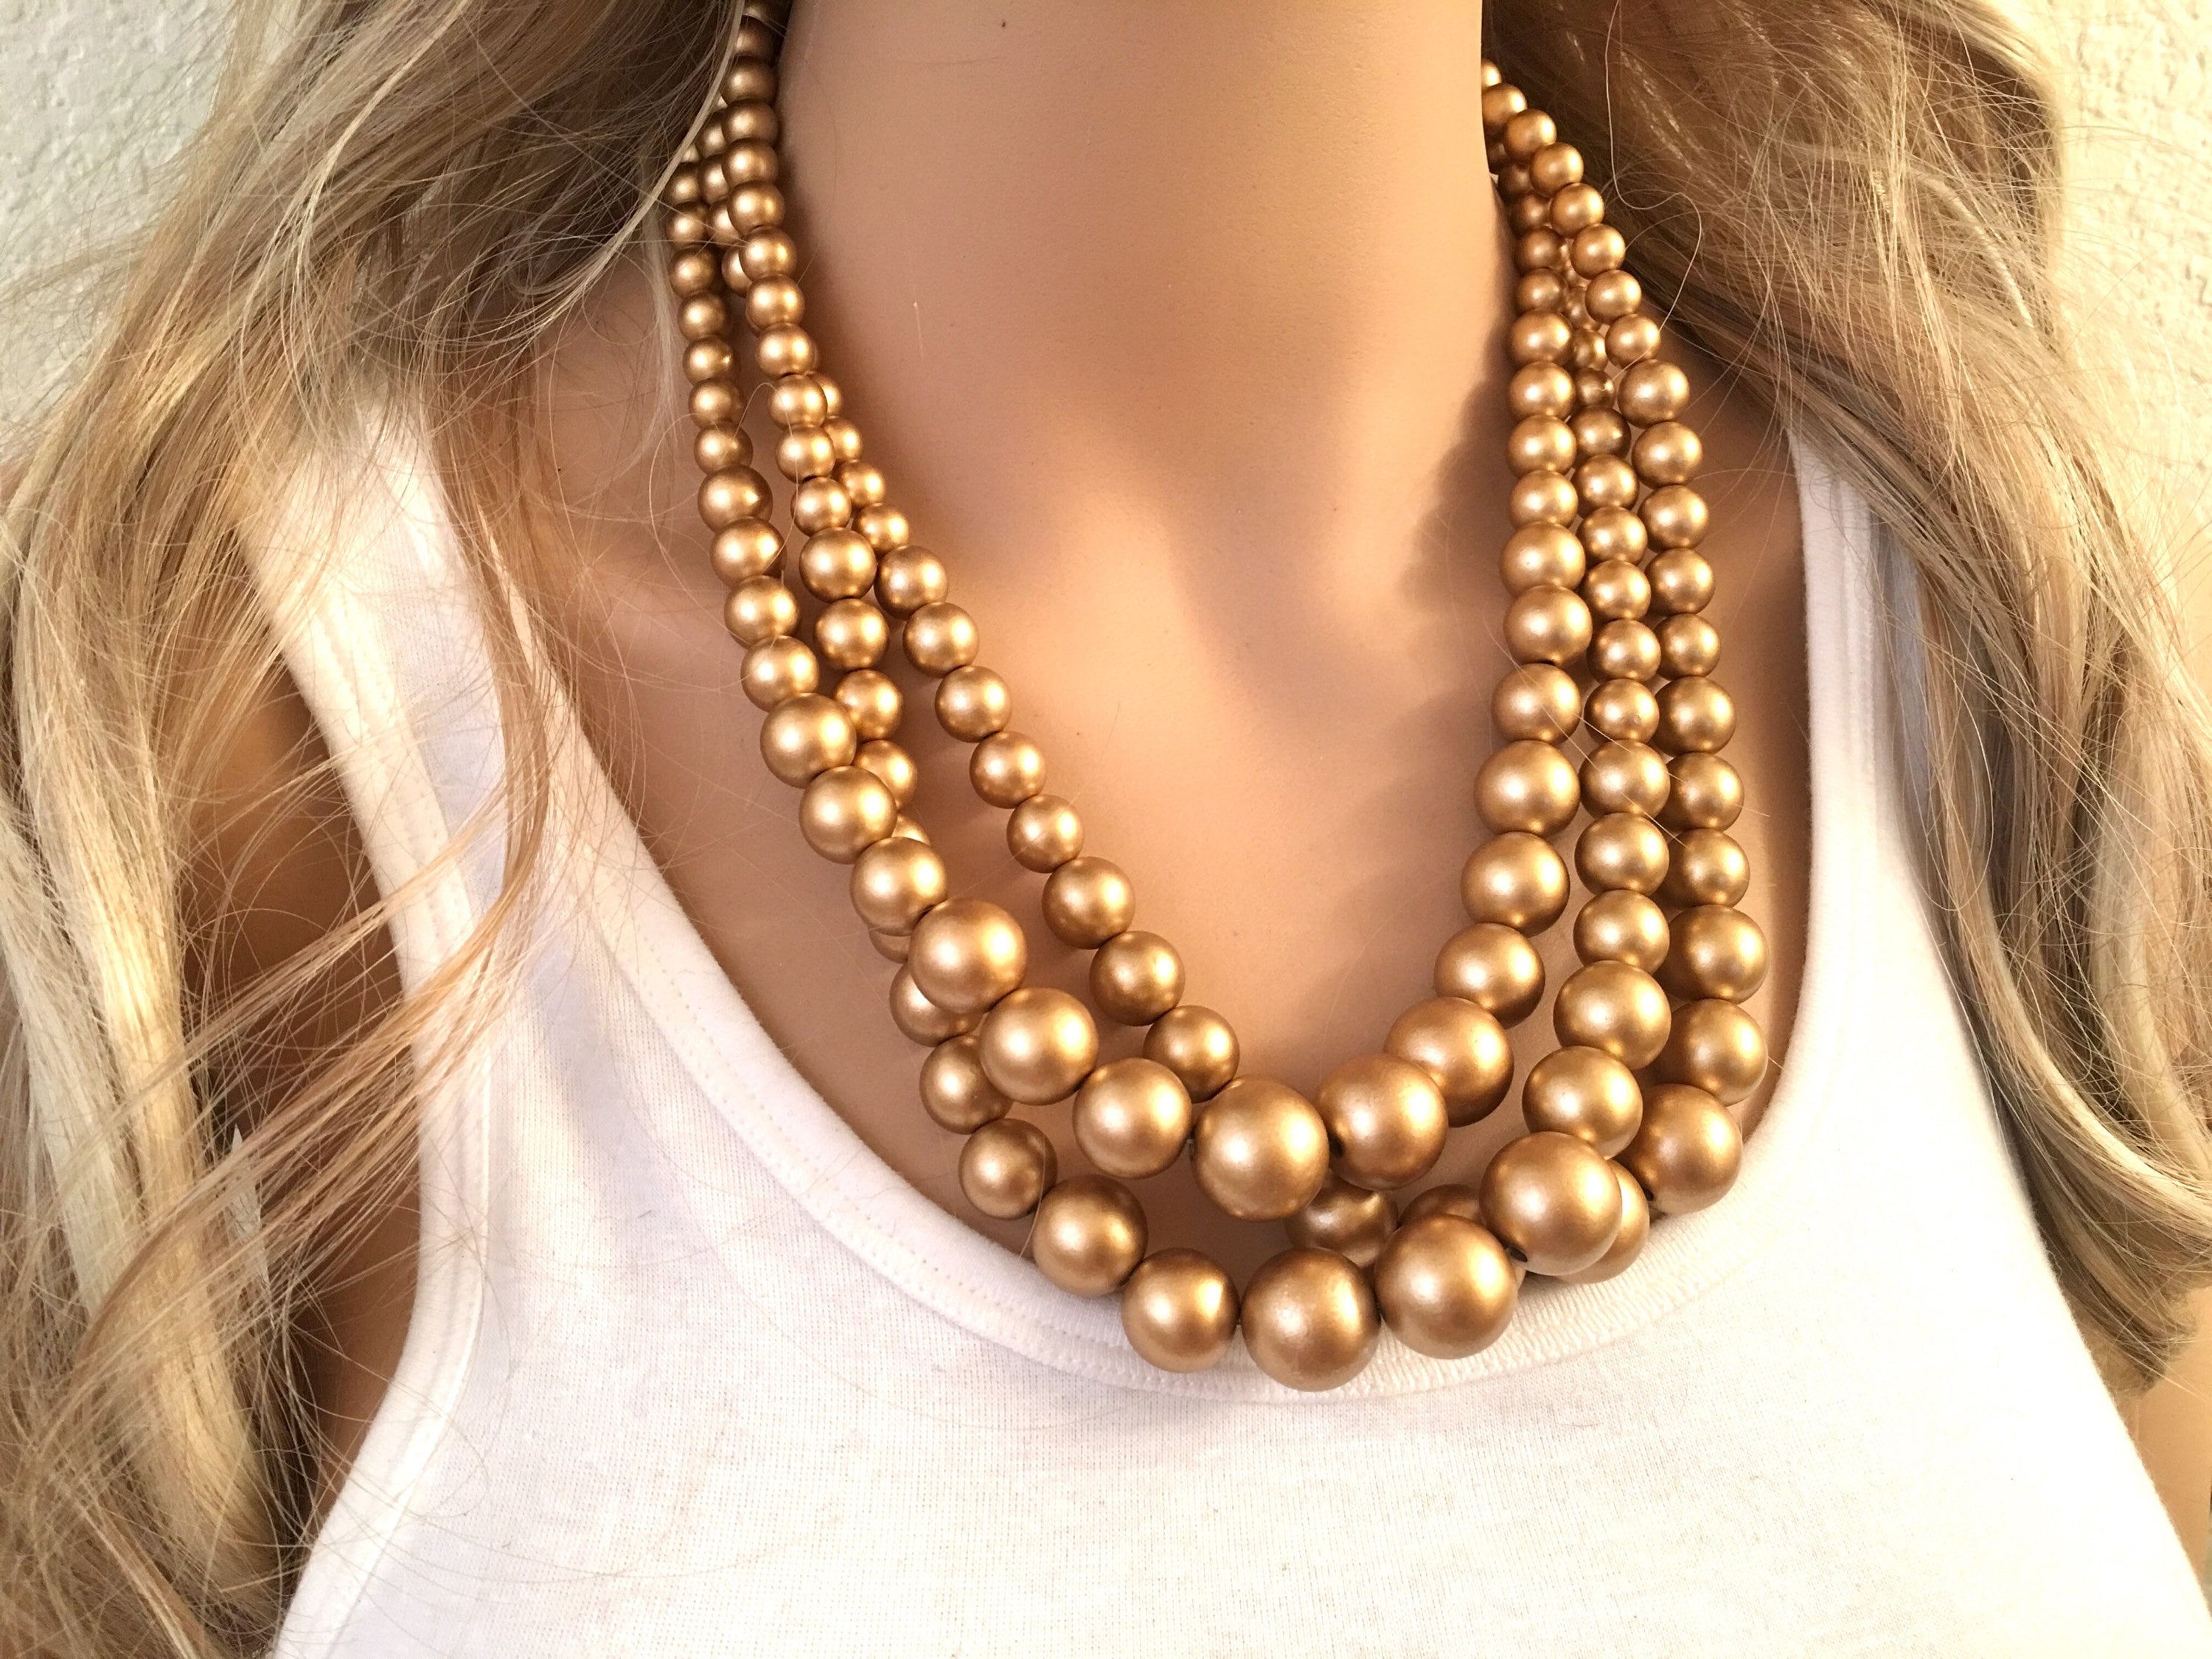 Beaded Bib Statement Necklace In Matte Gold Tone FAST SHIP FROM USA 